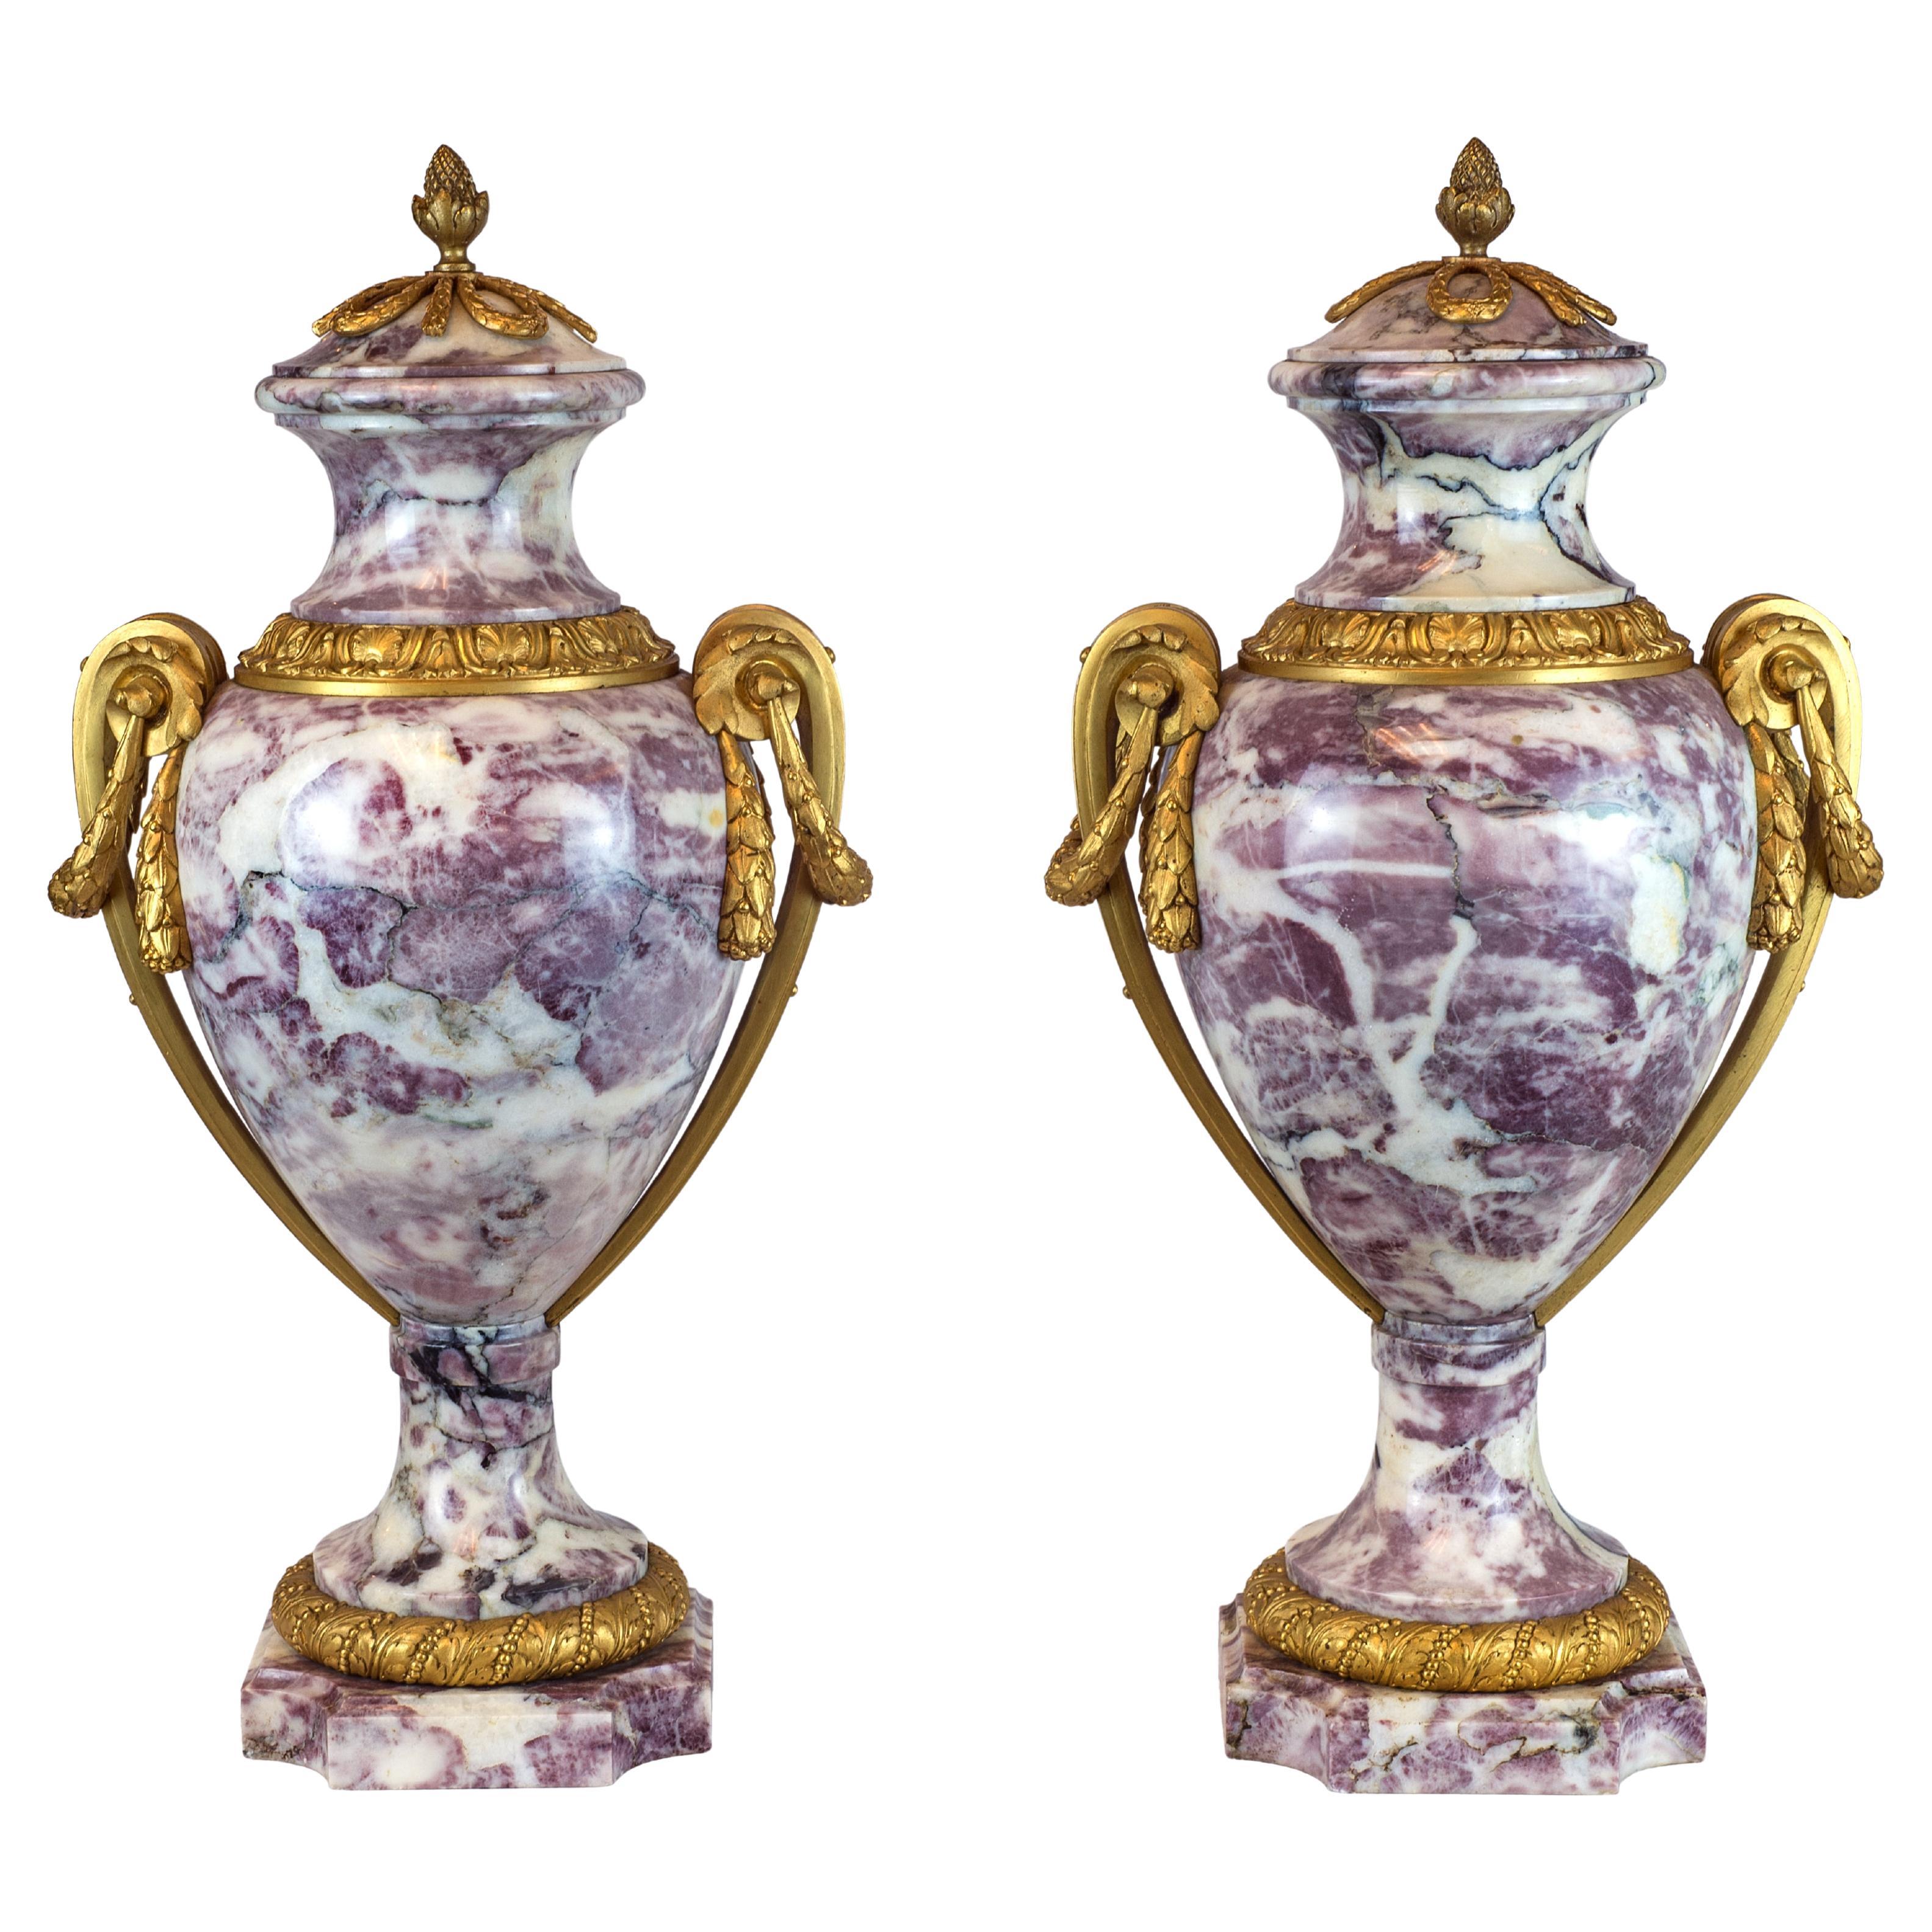 Pair of Elegant Ormolu-Mounted Brèche Violette Marble Covered Urns